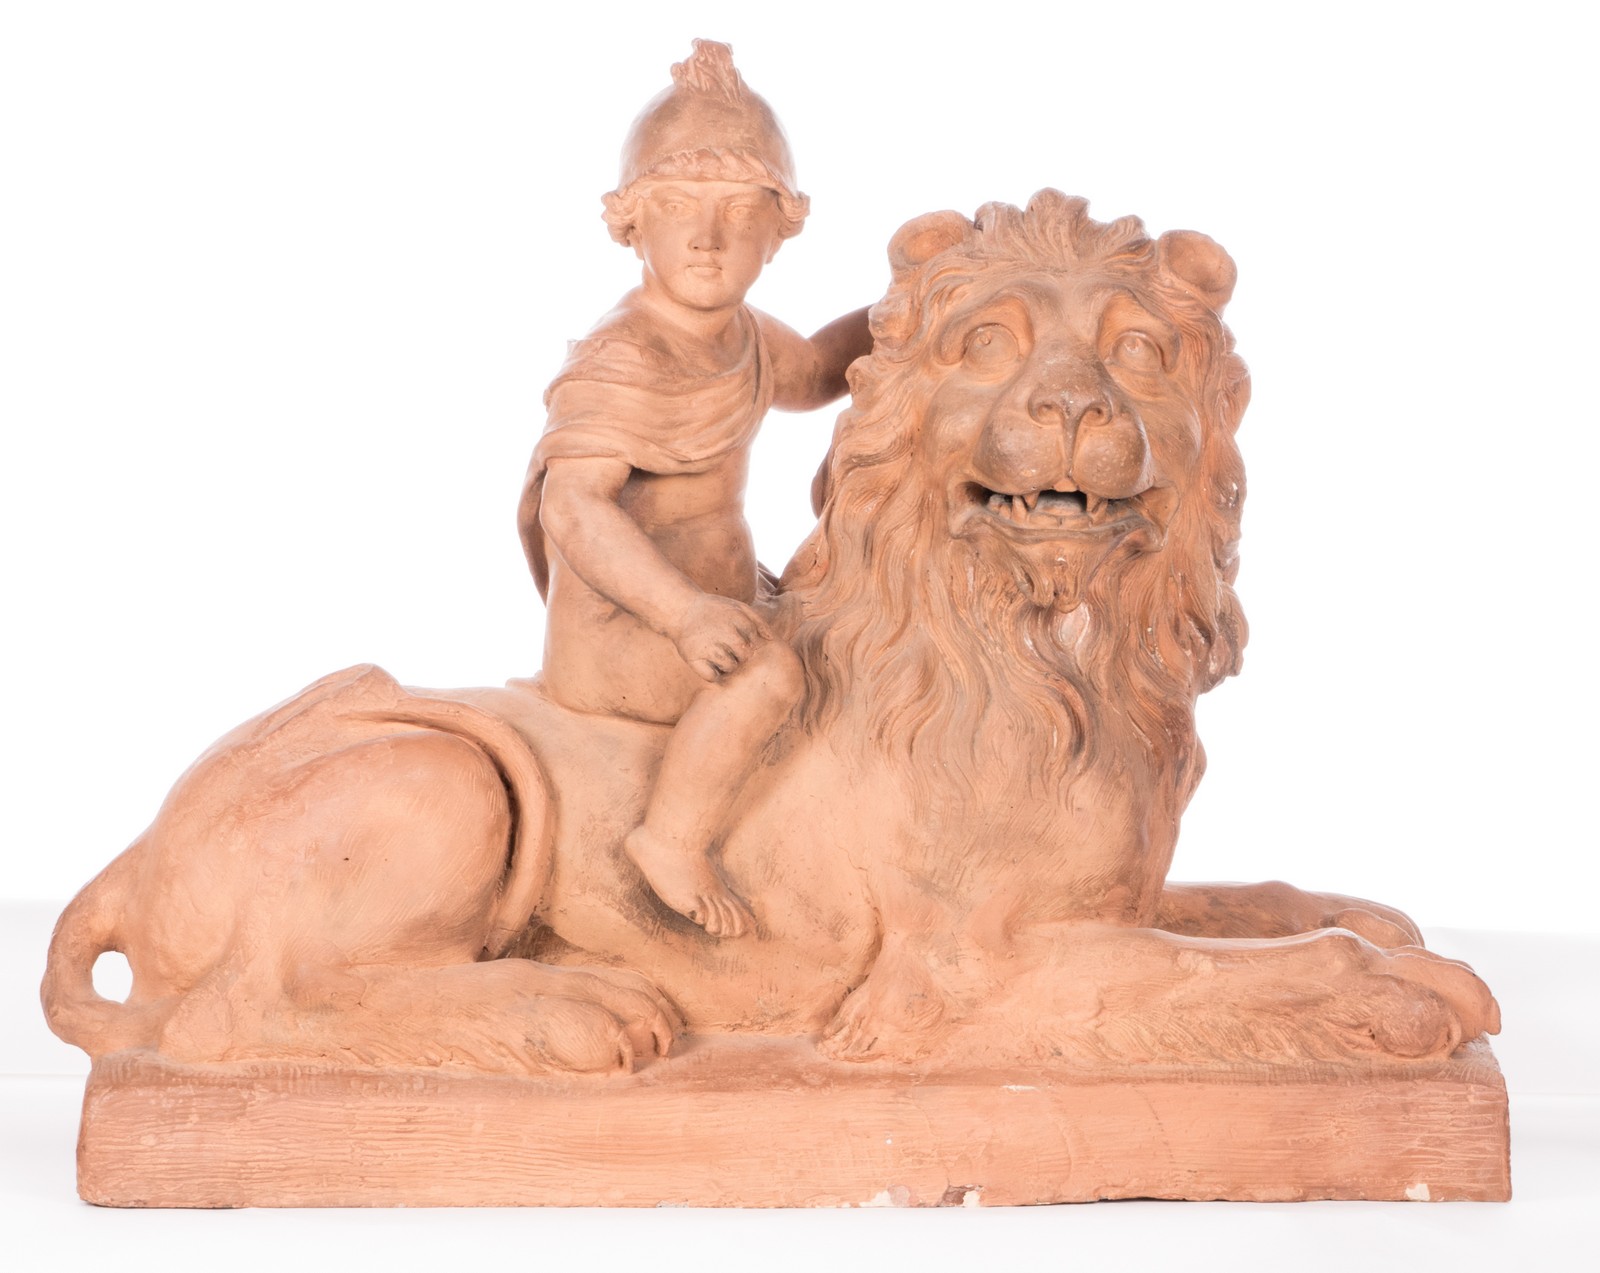 A large pair of terracotta sculptures depicting an allegoric scene, 19thC, H 78 - B 97 - D 35 cm - Image 12 of 62